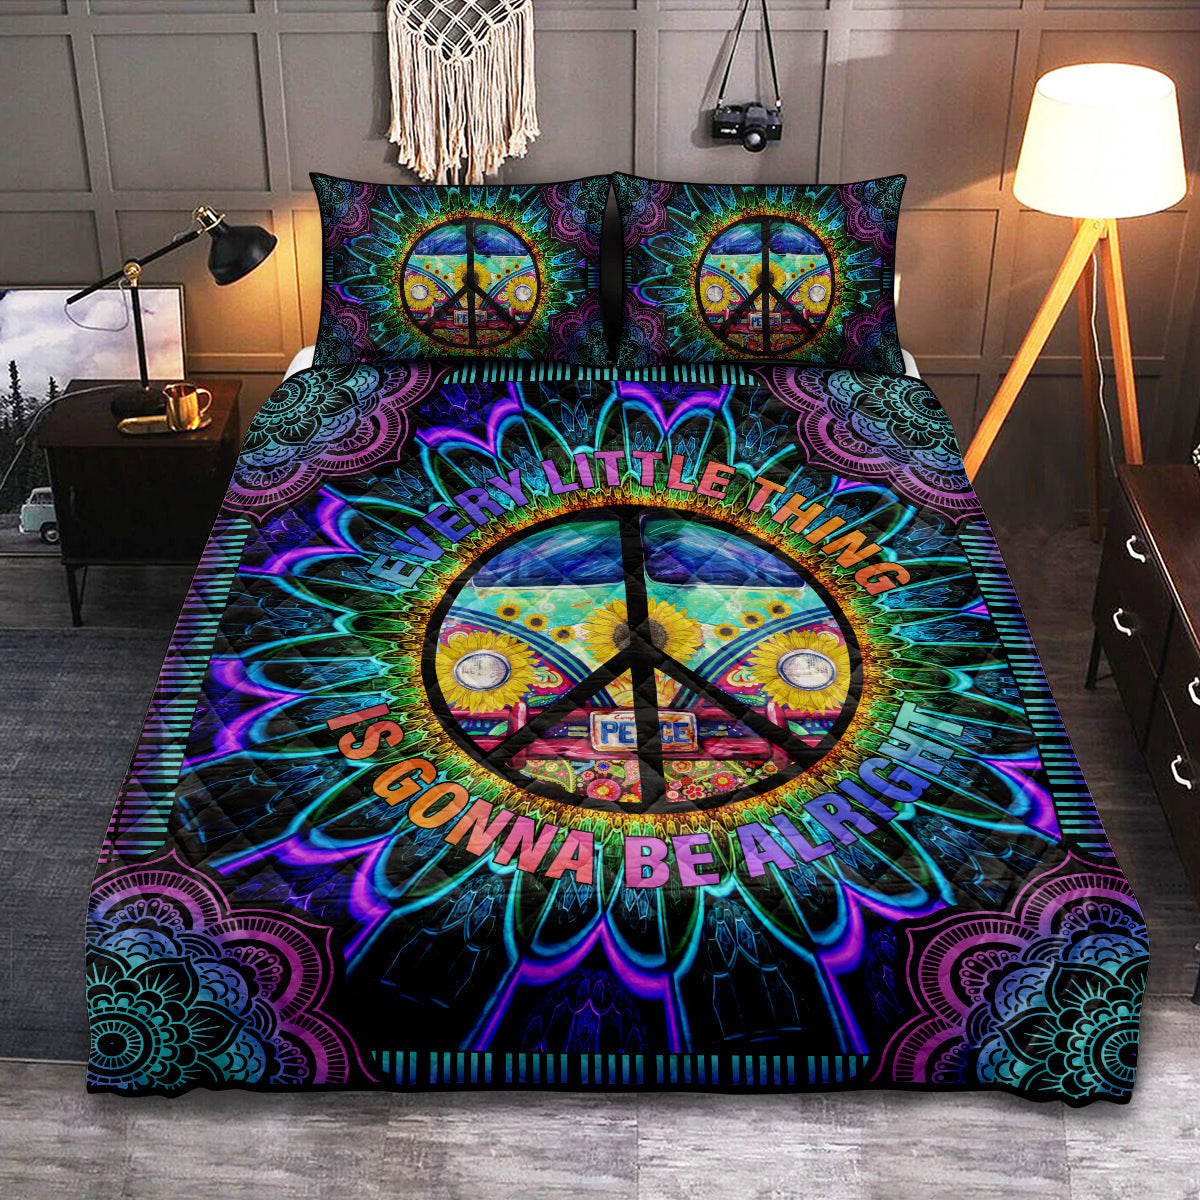 Hippie Bus Every Little Thing Is Gonna Be Alright - Quilt Set - Owls Matrix LTD